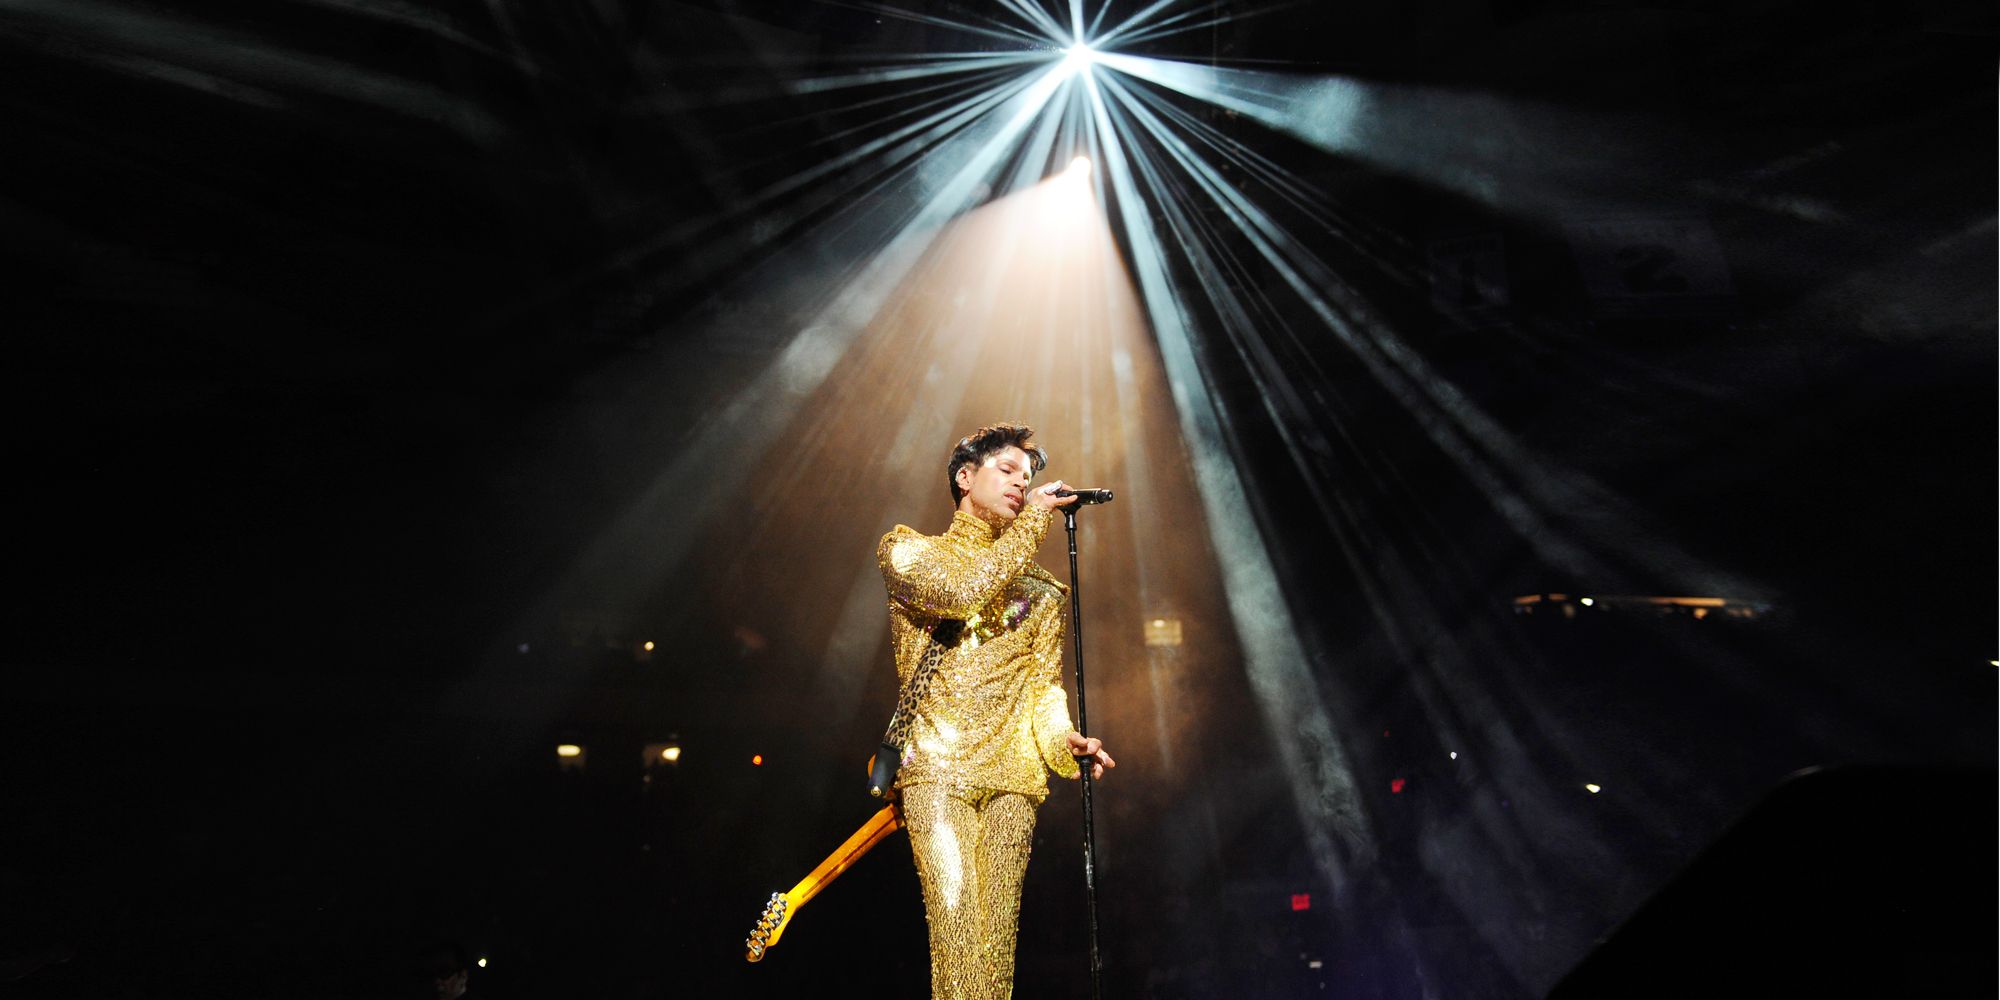 Microphone, Audio equipment, Entertainment, Music artist, Performing arts, Artist, Stage, Singing, Lens flare, Performance, 